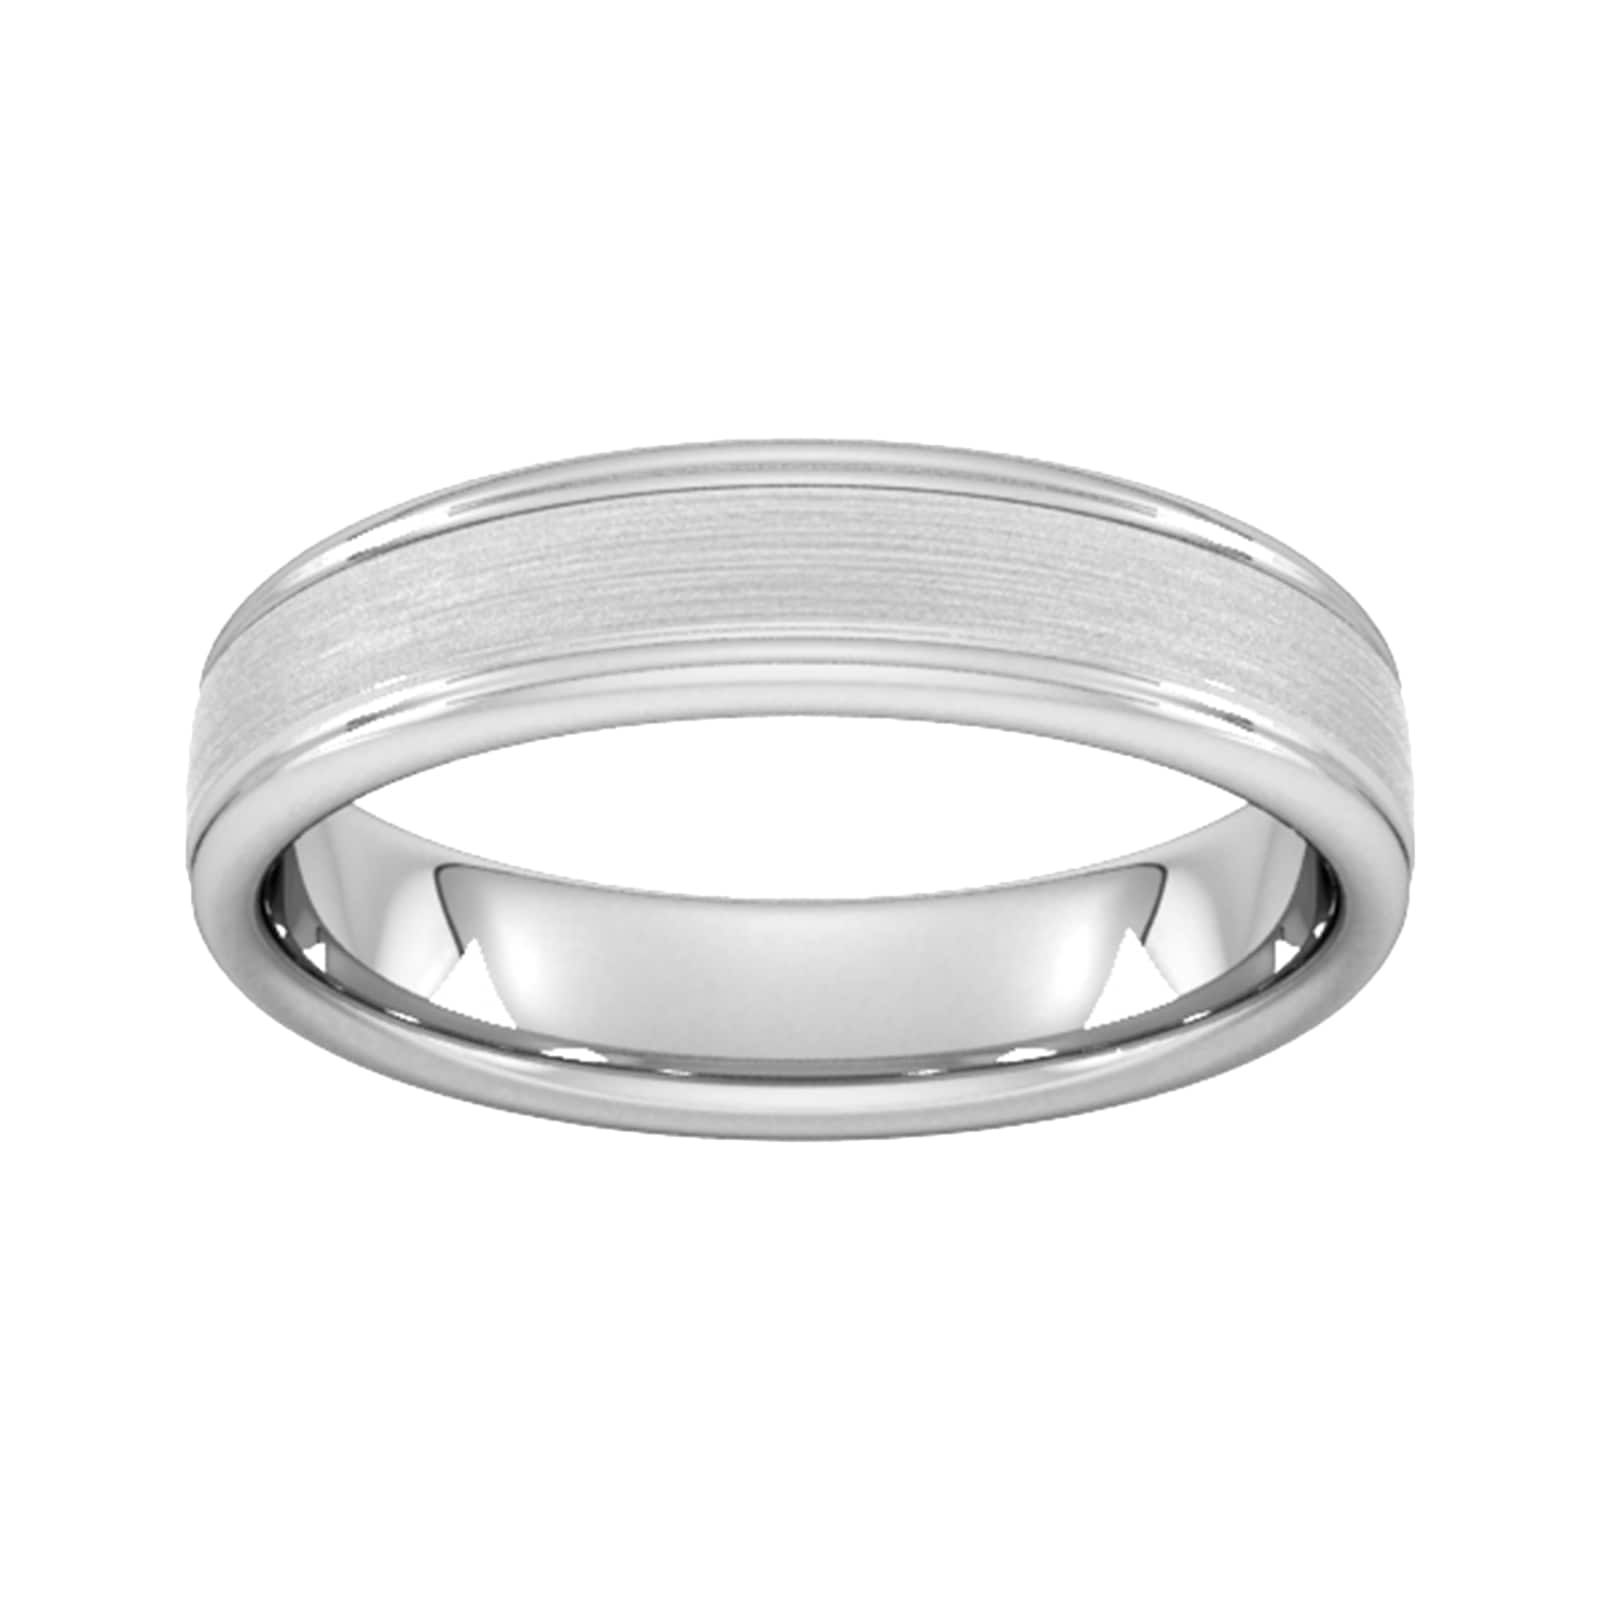 5mm Flat Court Heavy Matt Centre With Grooves Wedding Ring In 18 Carat White Gold - Ring Size X